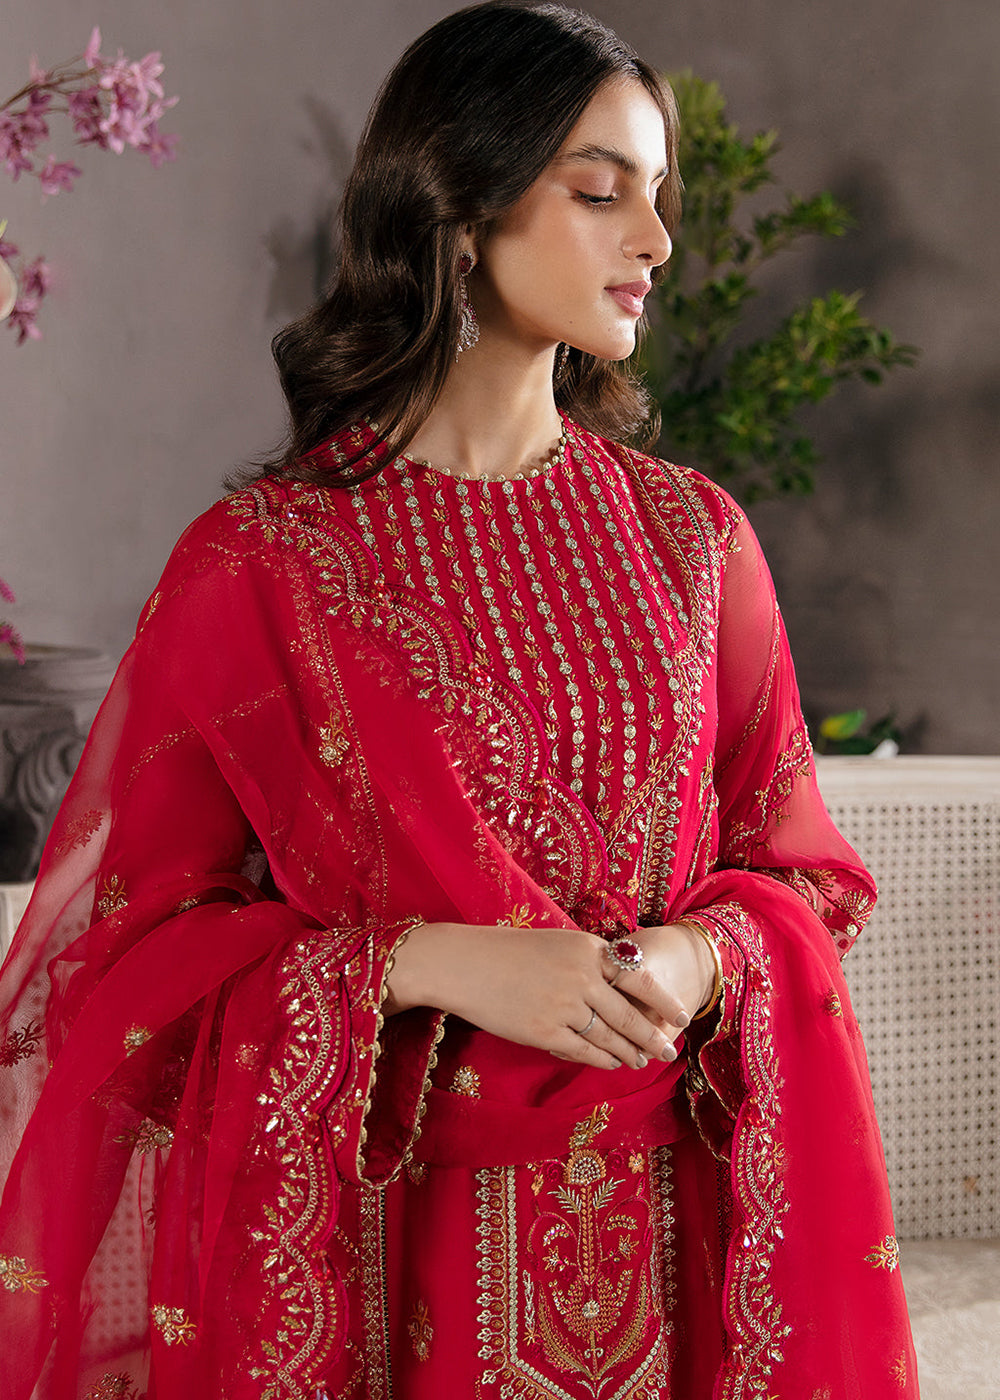 Buy Now Red Pakistani Salwar Suit - Afrozeh La Fuchsia Formals '23 - Carmine Online in USA, UK, Canada & Worldwide at Empress Clothing. 